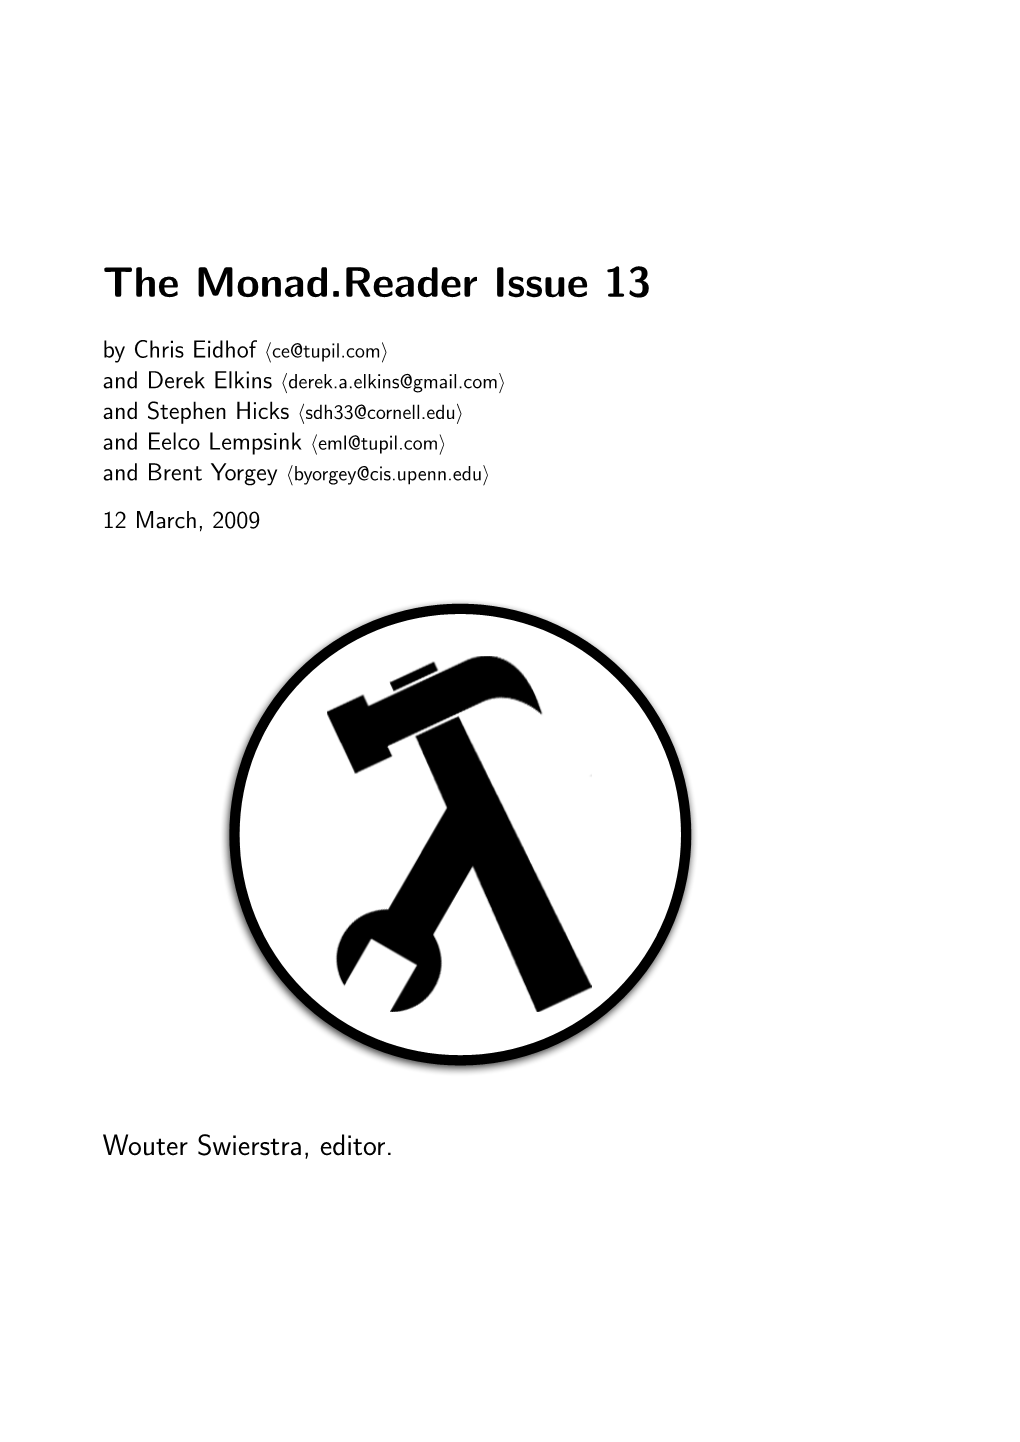 The Monad.Reader Issue 13